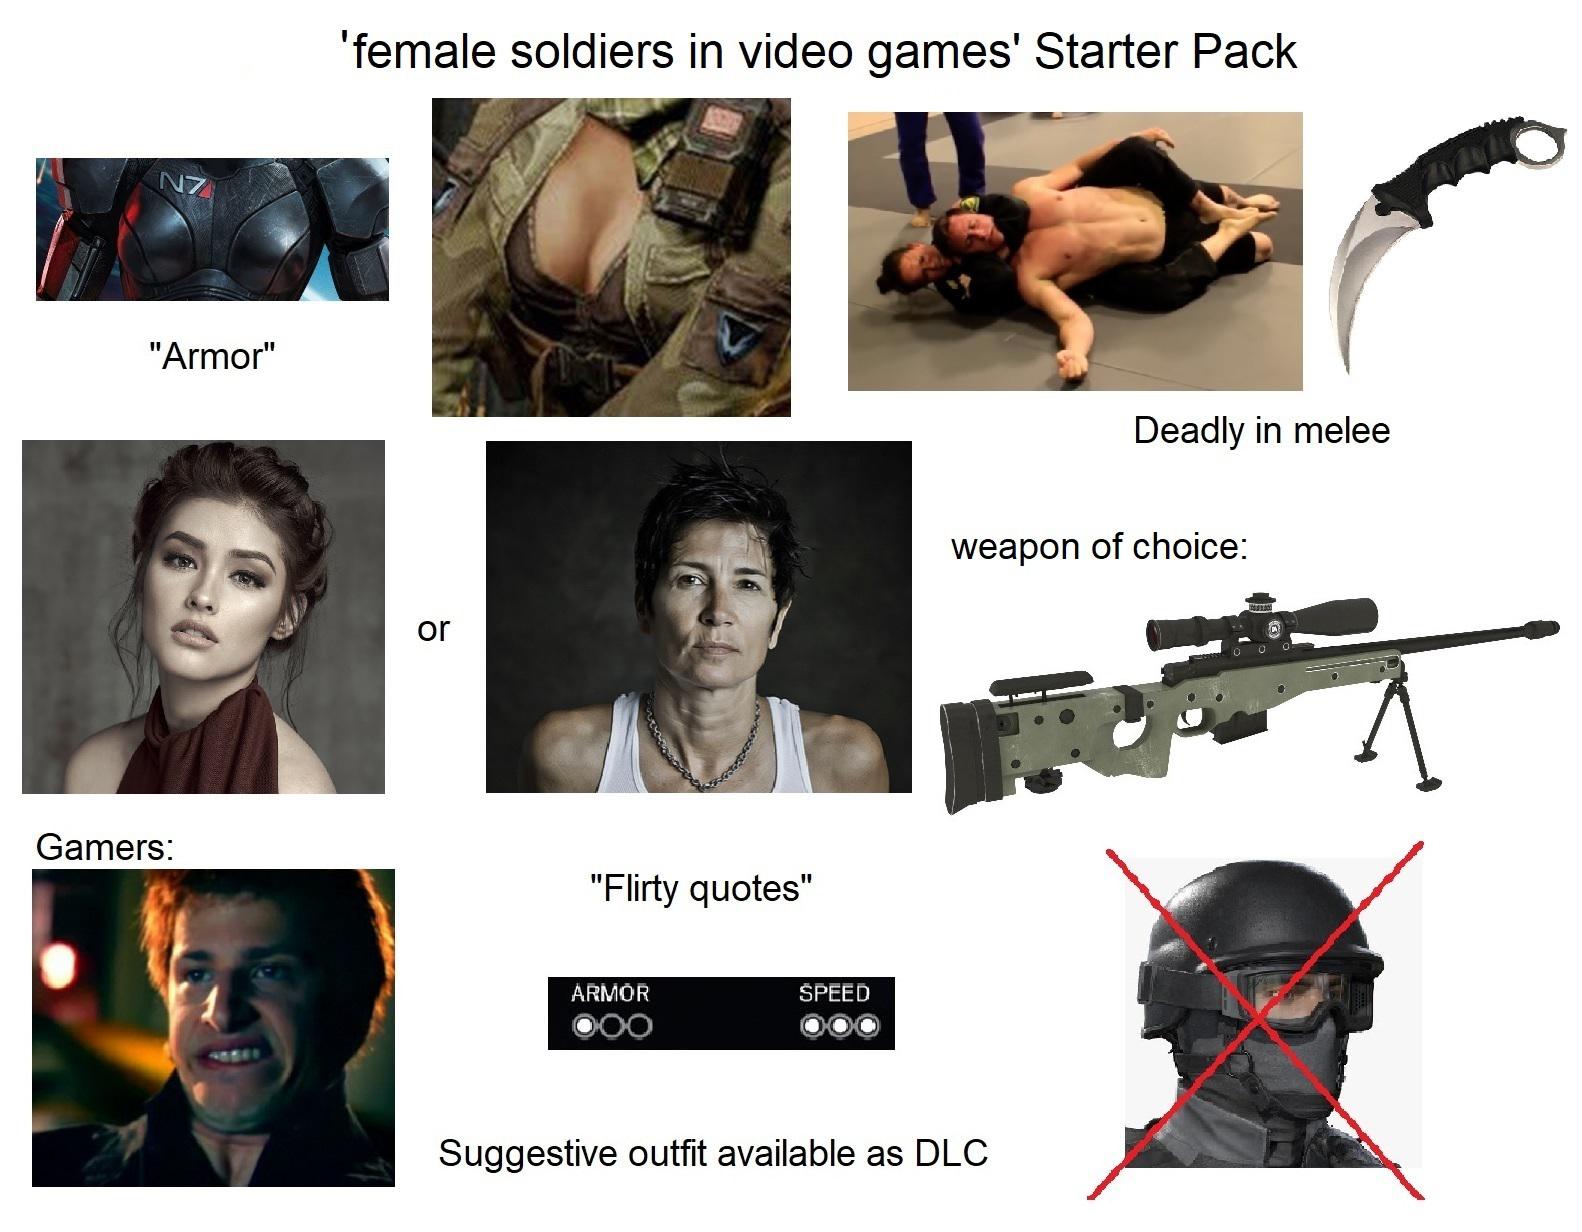 website - 'female soldiers in video games' Starter Pack "Armor" Deadly in melee weapon of choice or 0 0 0 Gamers "Flirty quotes" Armor Speed 000 Suggestive outfit available as Dlc